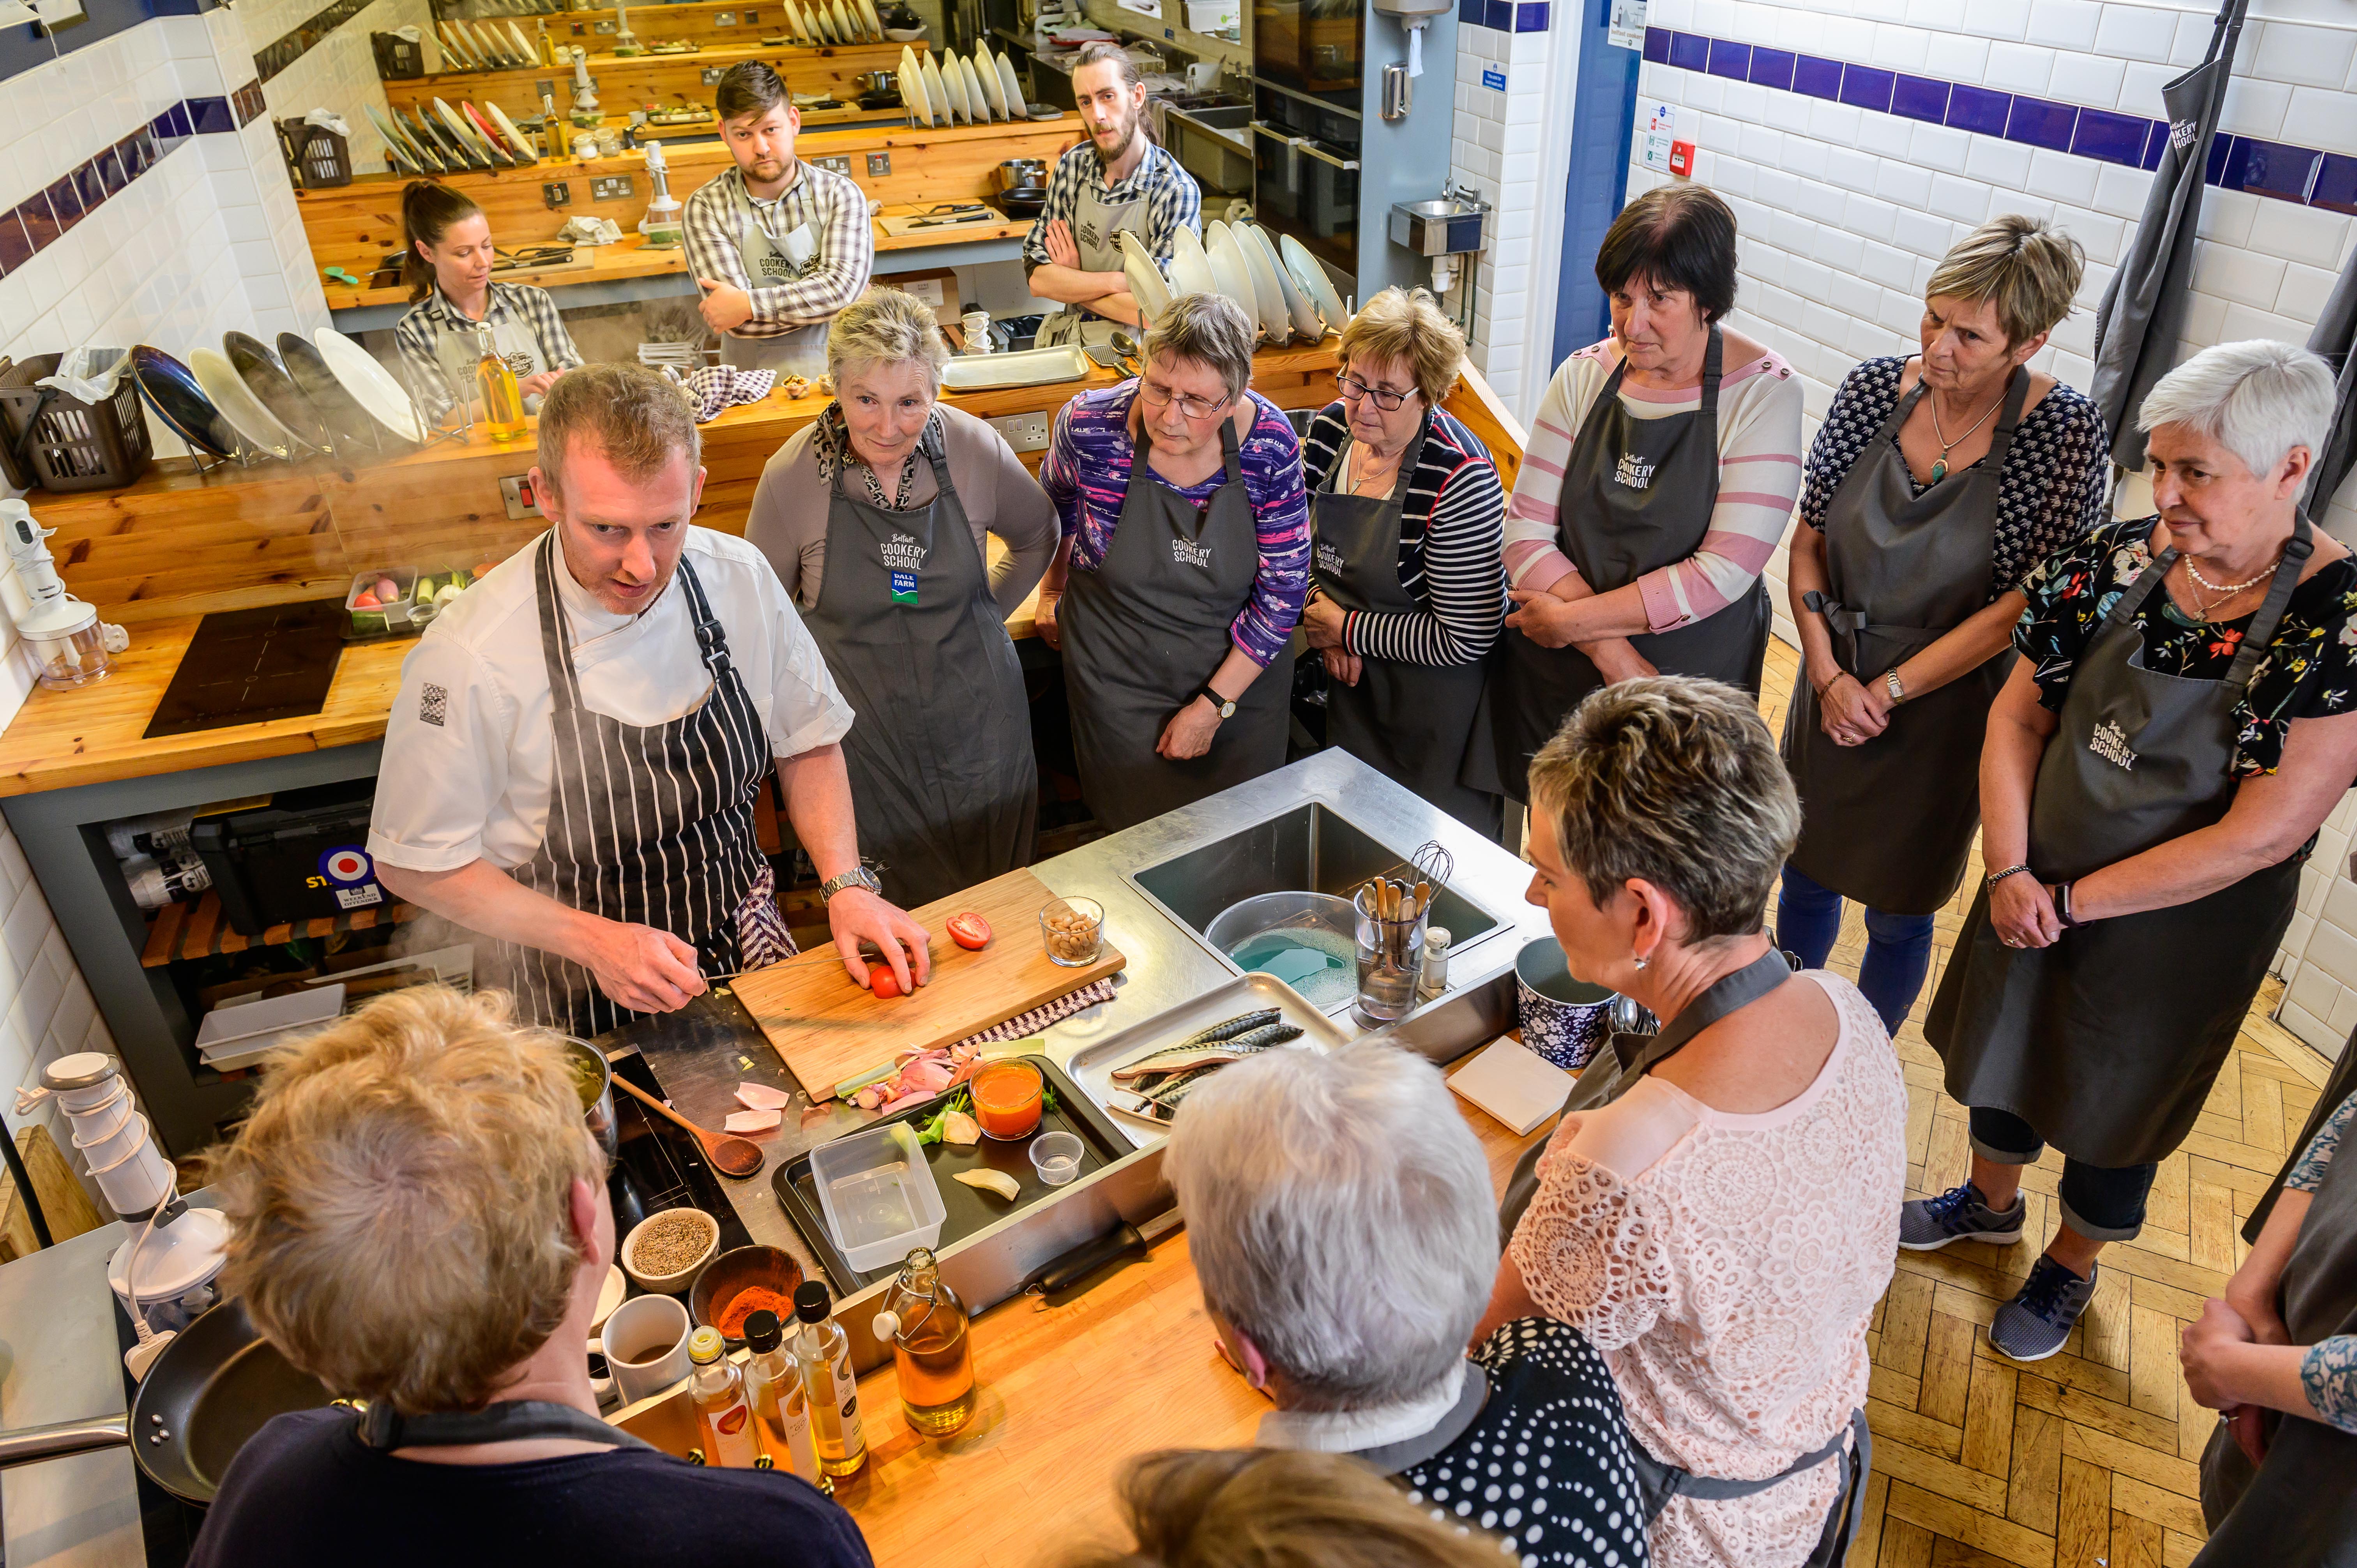 People in a kitchen learning about seafood at an event in Northern Ireland